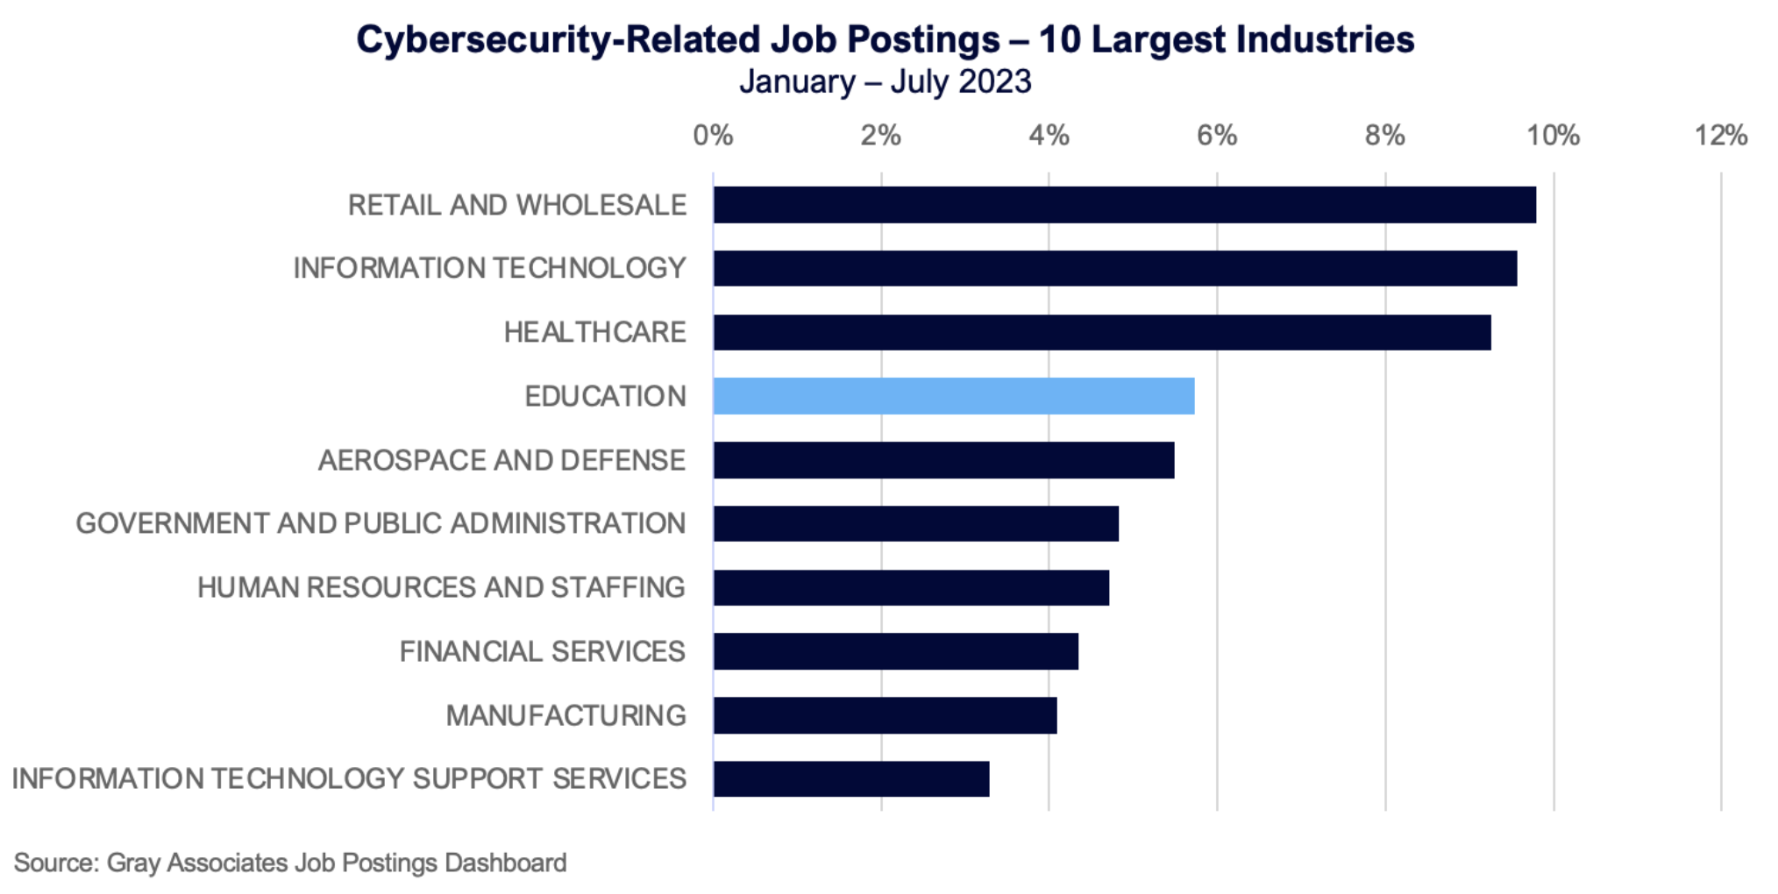 Cybersecurity-Related Job Postings - 10 Largest Industries (January - July 2023)